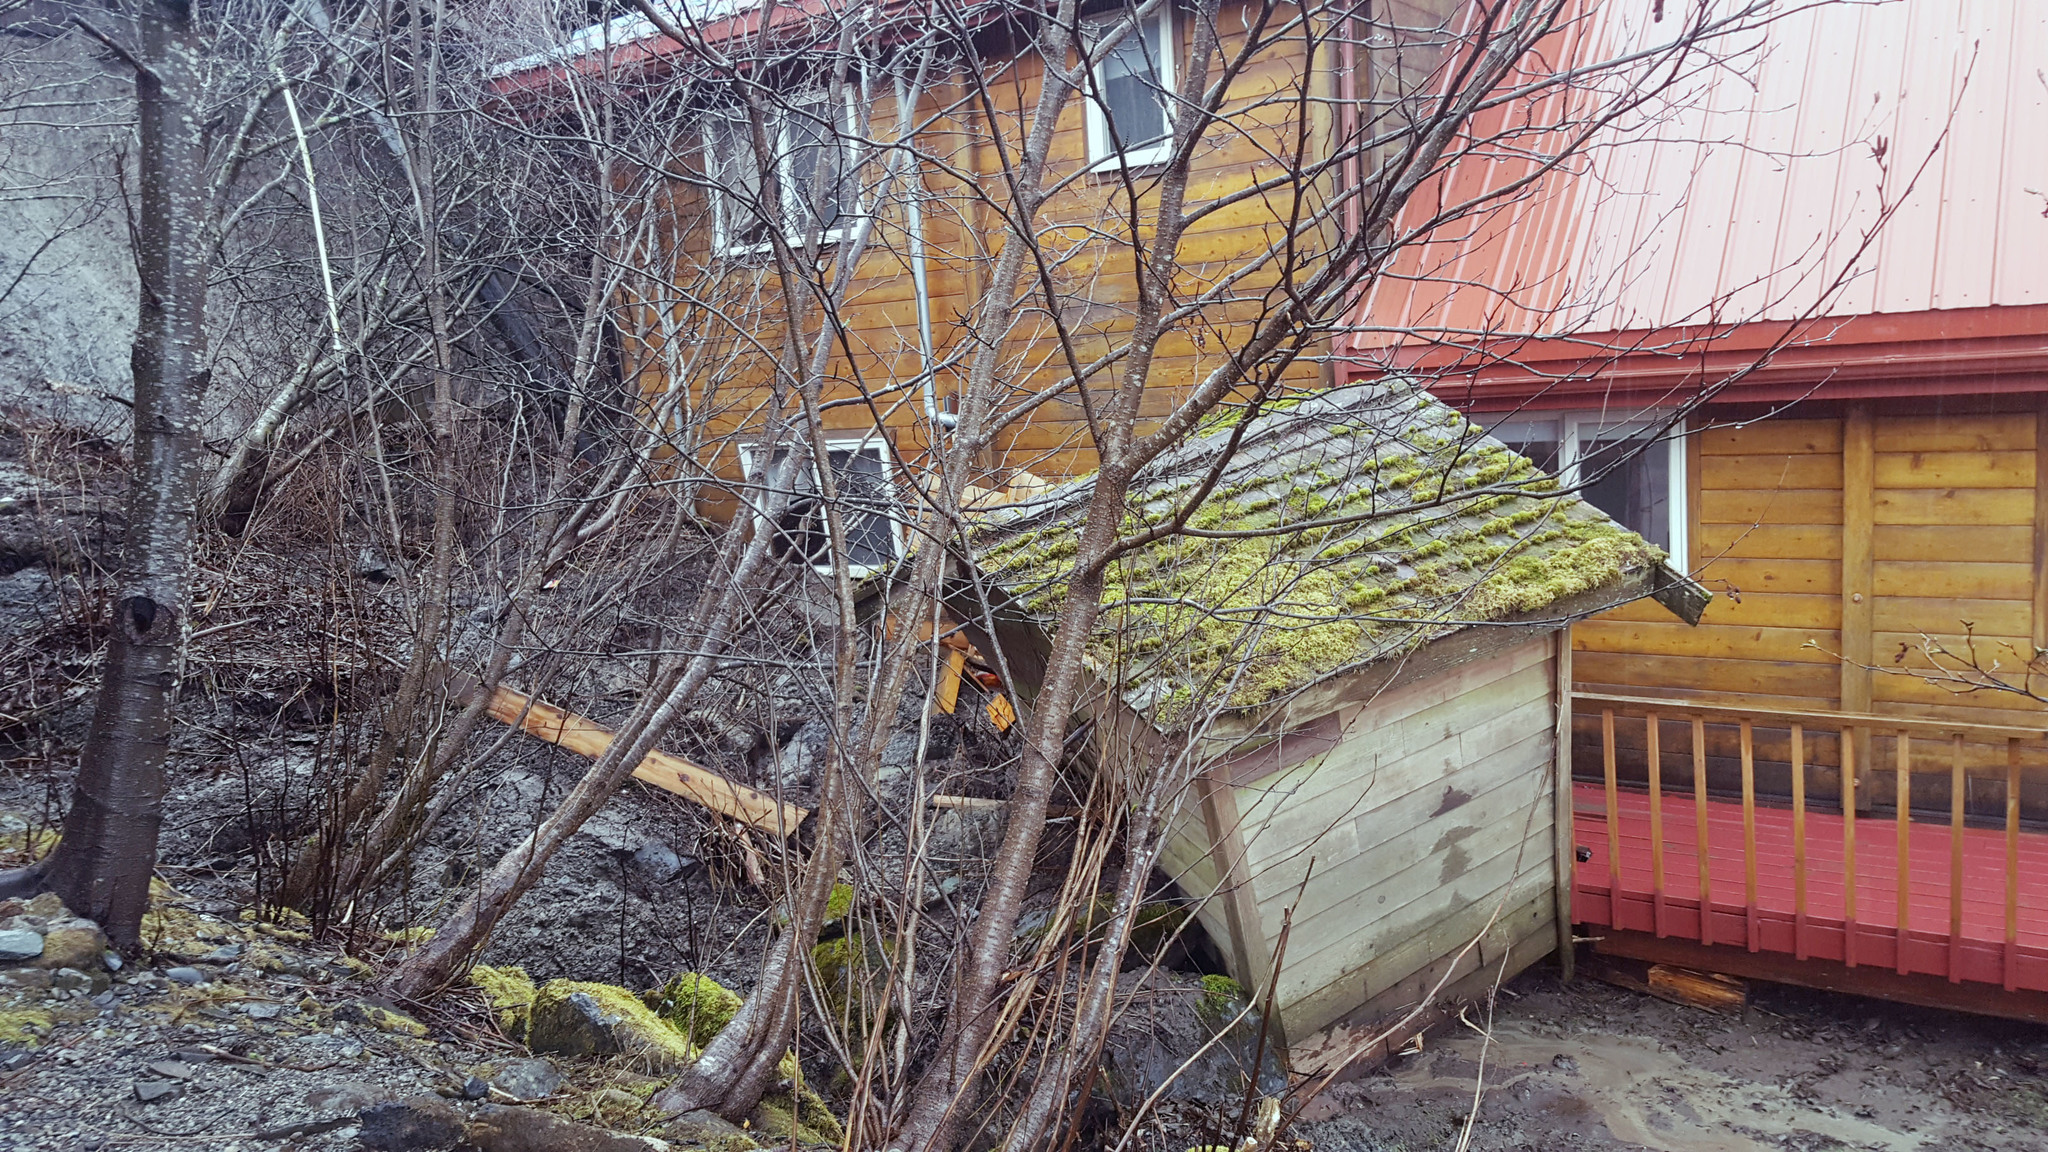 A mudslide caused when a retaining wall failed Wednesday pushed a shed down the hill and piled mud and debris up to the window of a residence in the 2500 block of Douglas Highway. (Liz Kellar | Juneau Empire)